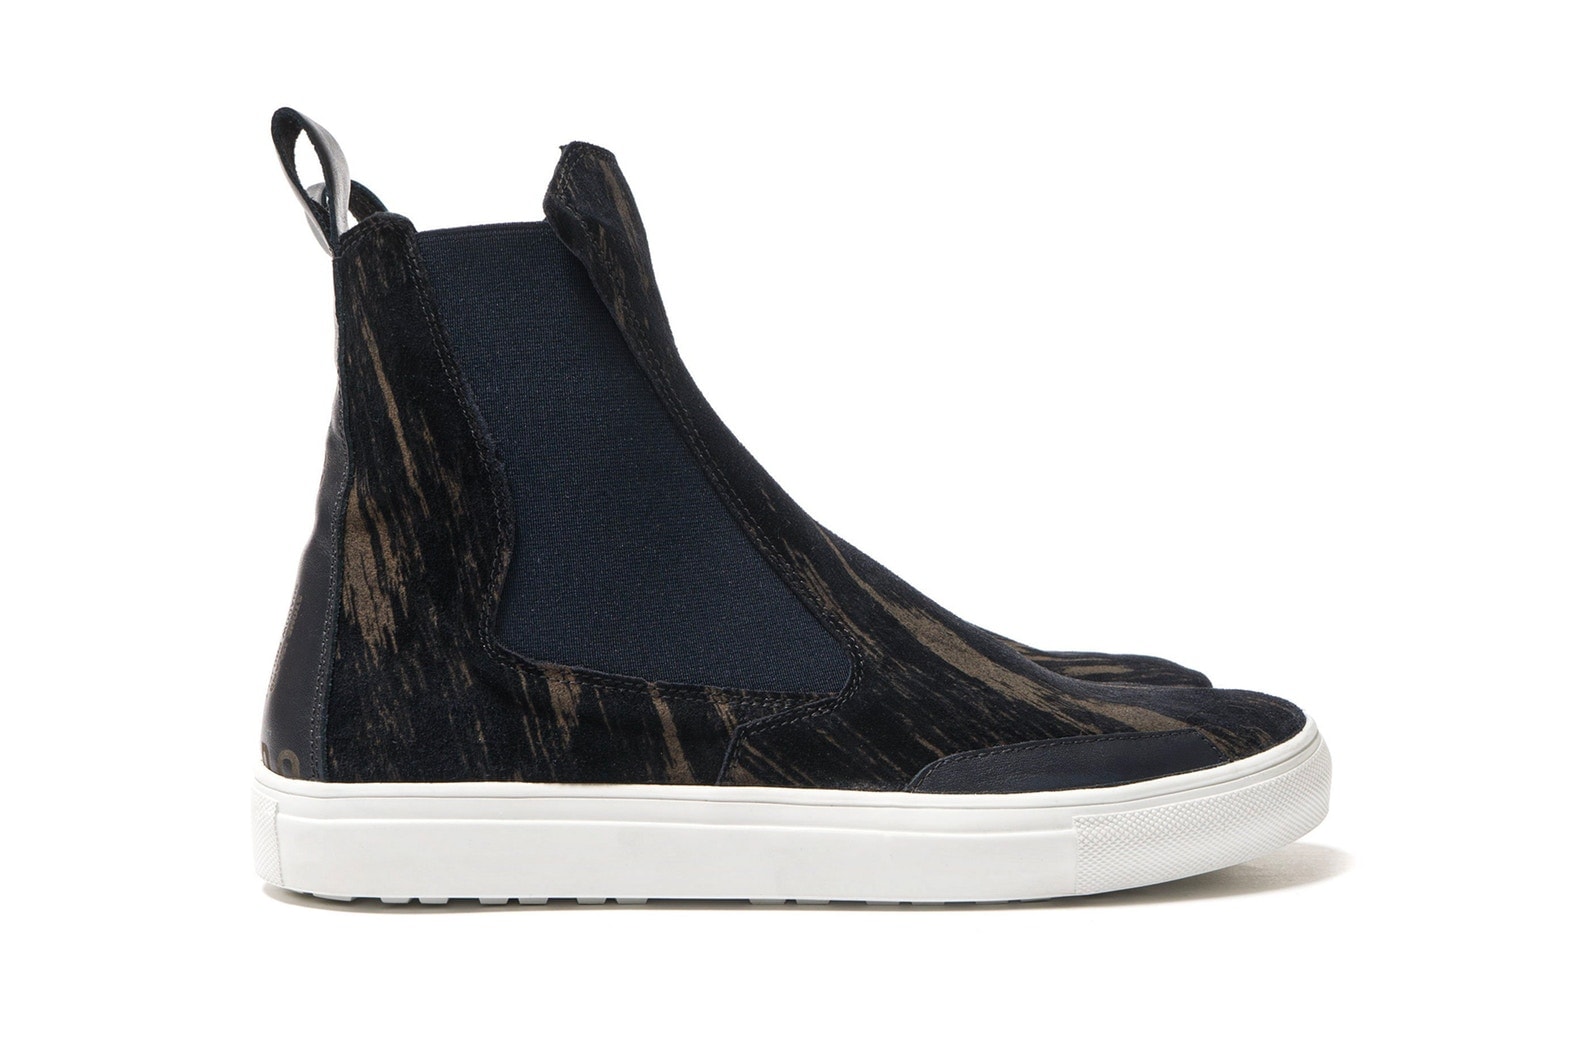 Stone Island Shadow Project "Bleu" Laser Graphic Suede Shoes